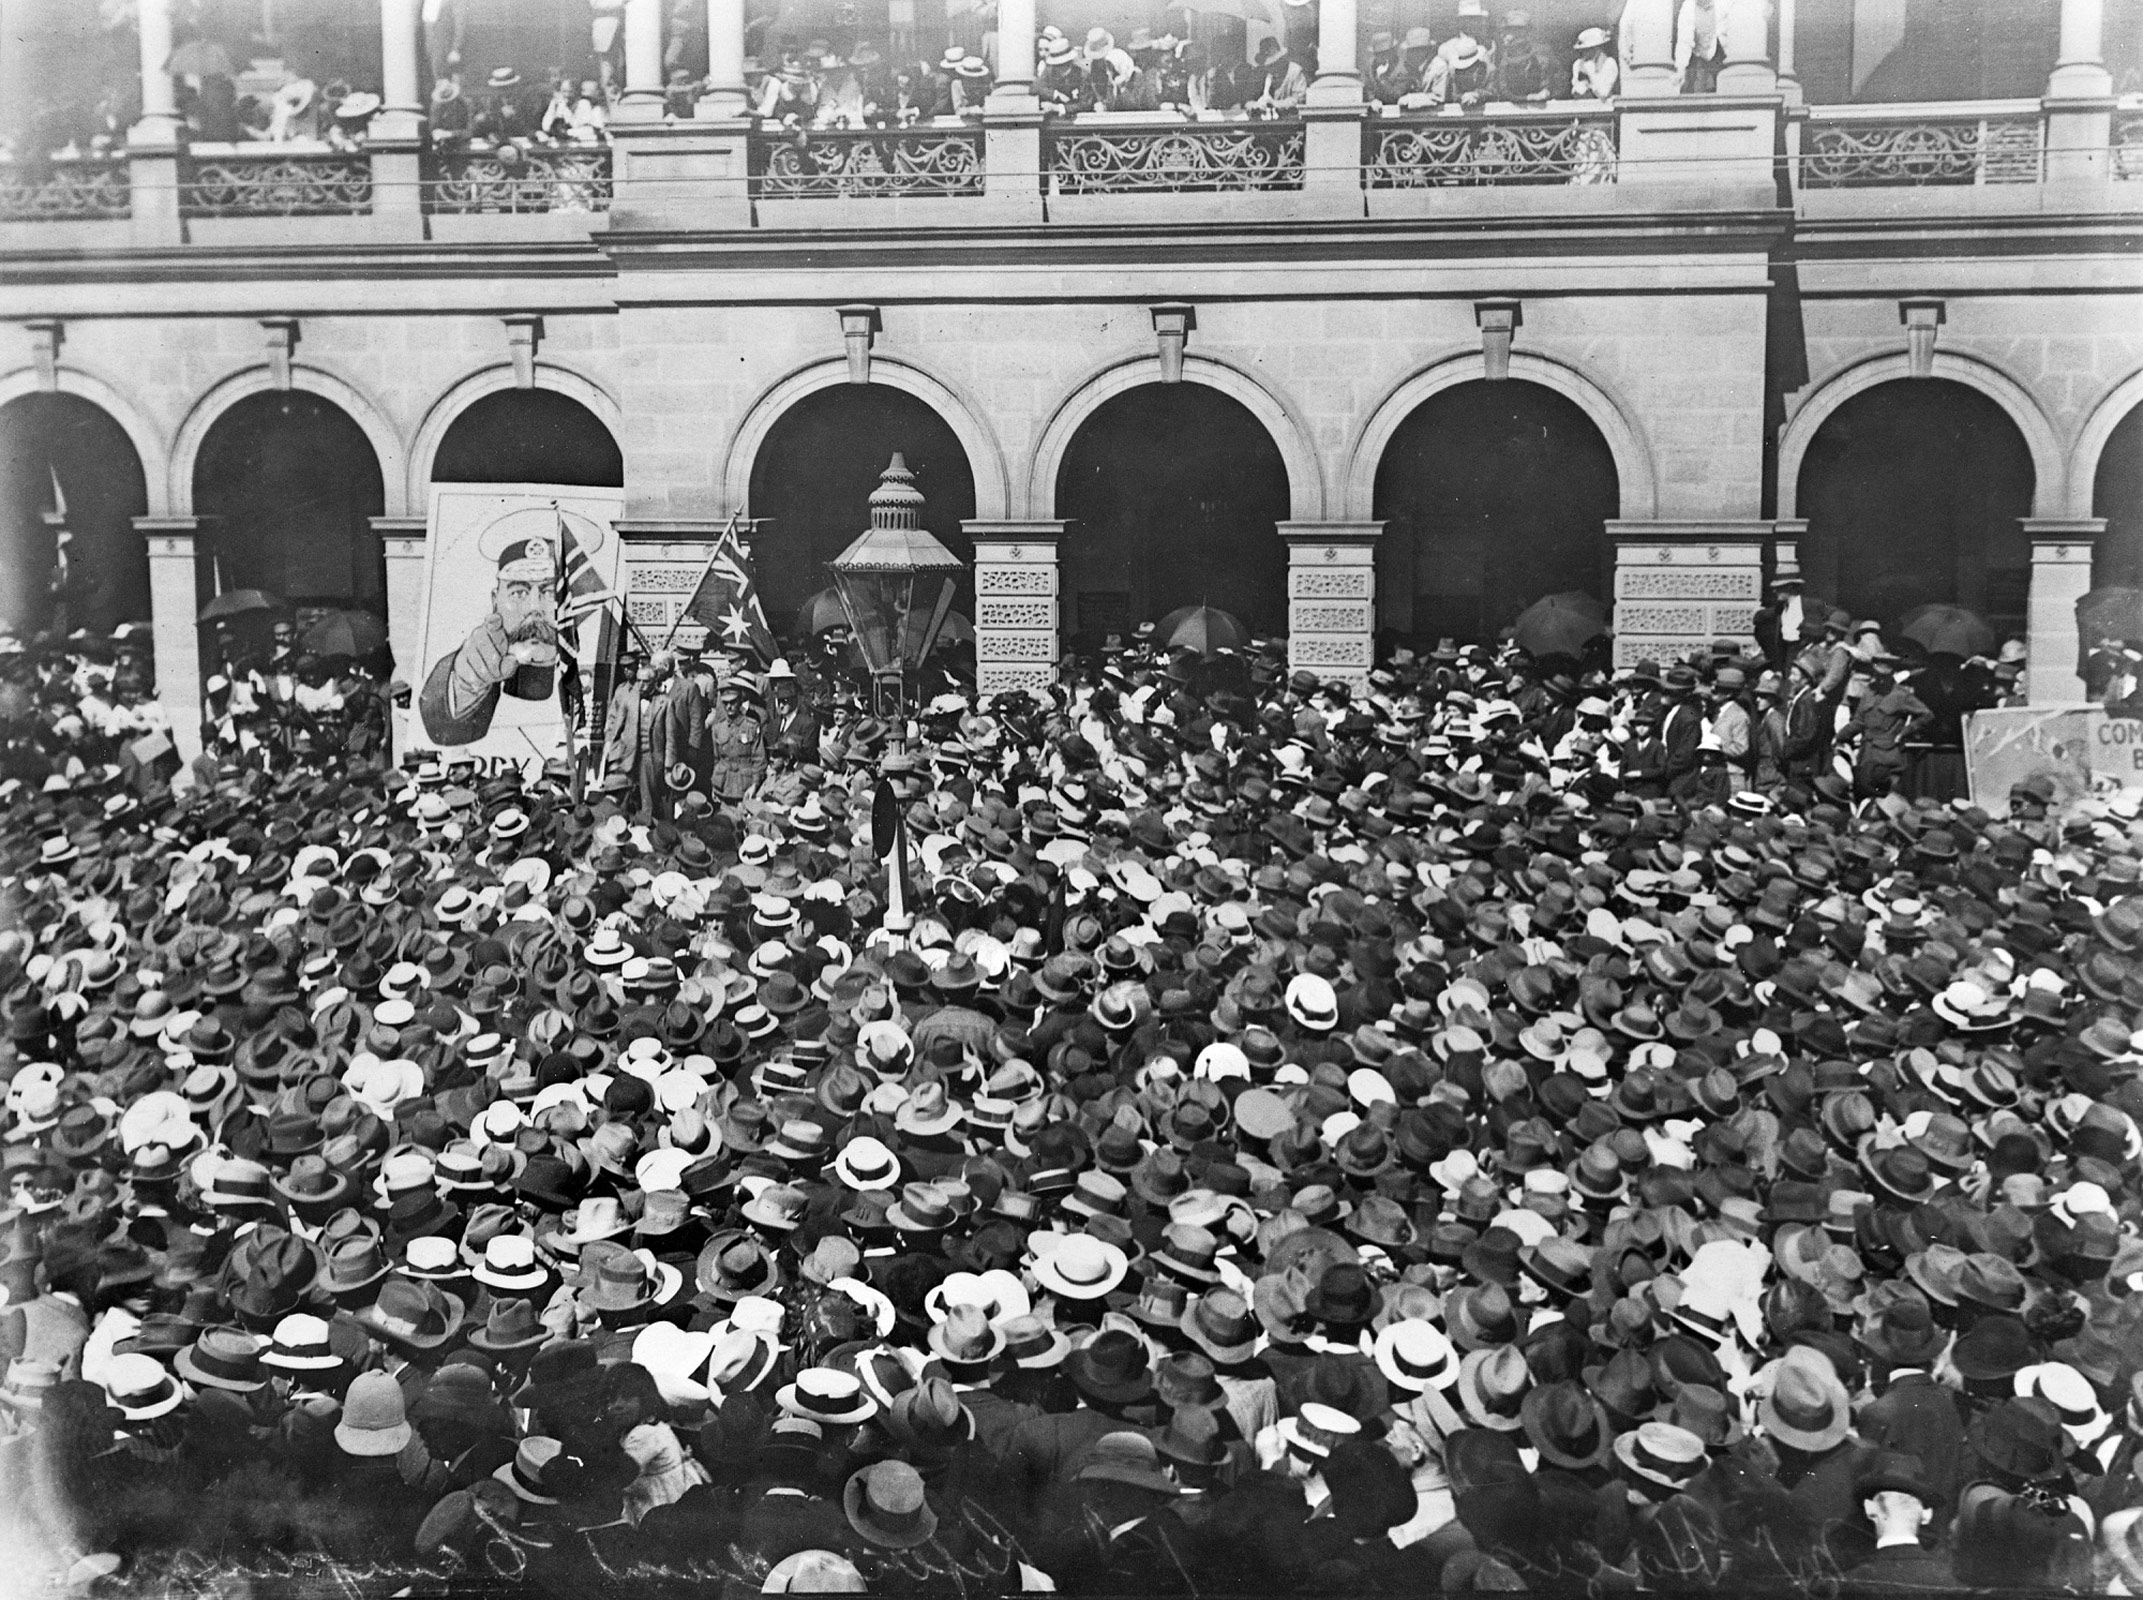 Prime Minister Billy Hughes speaking to a large crowd during the conscription referendum campaign, 1916